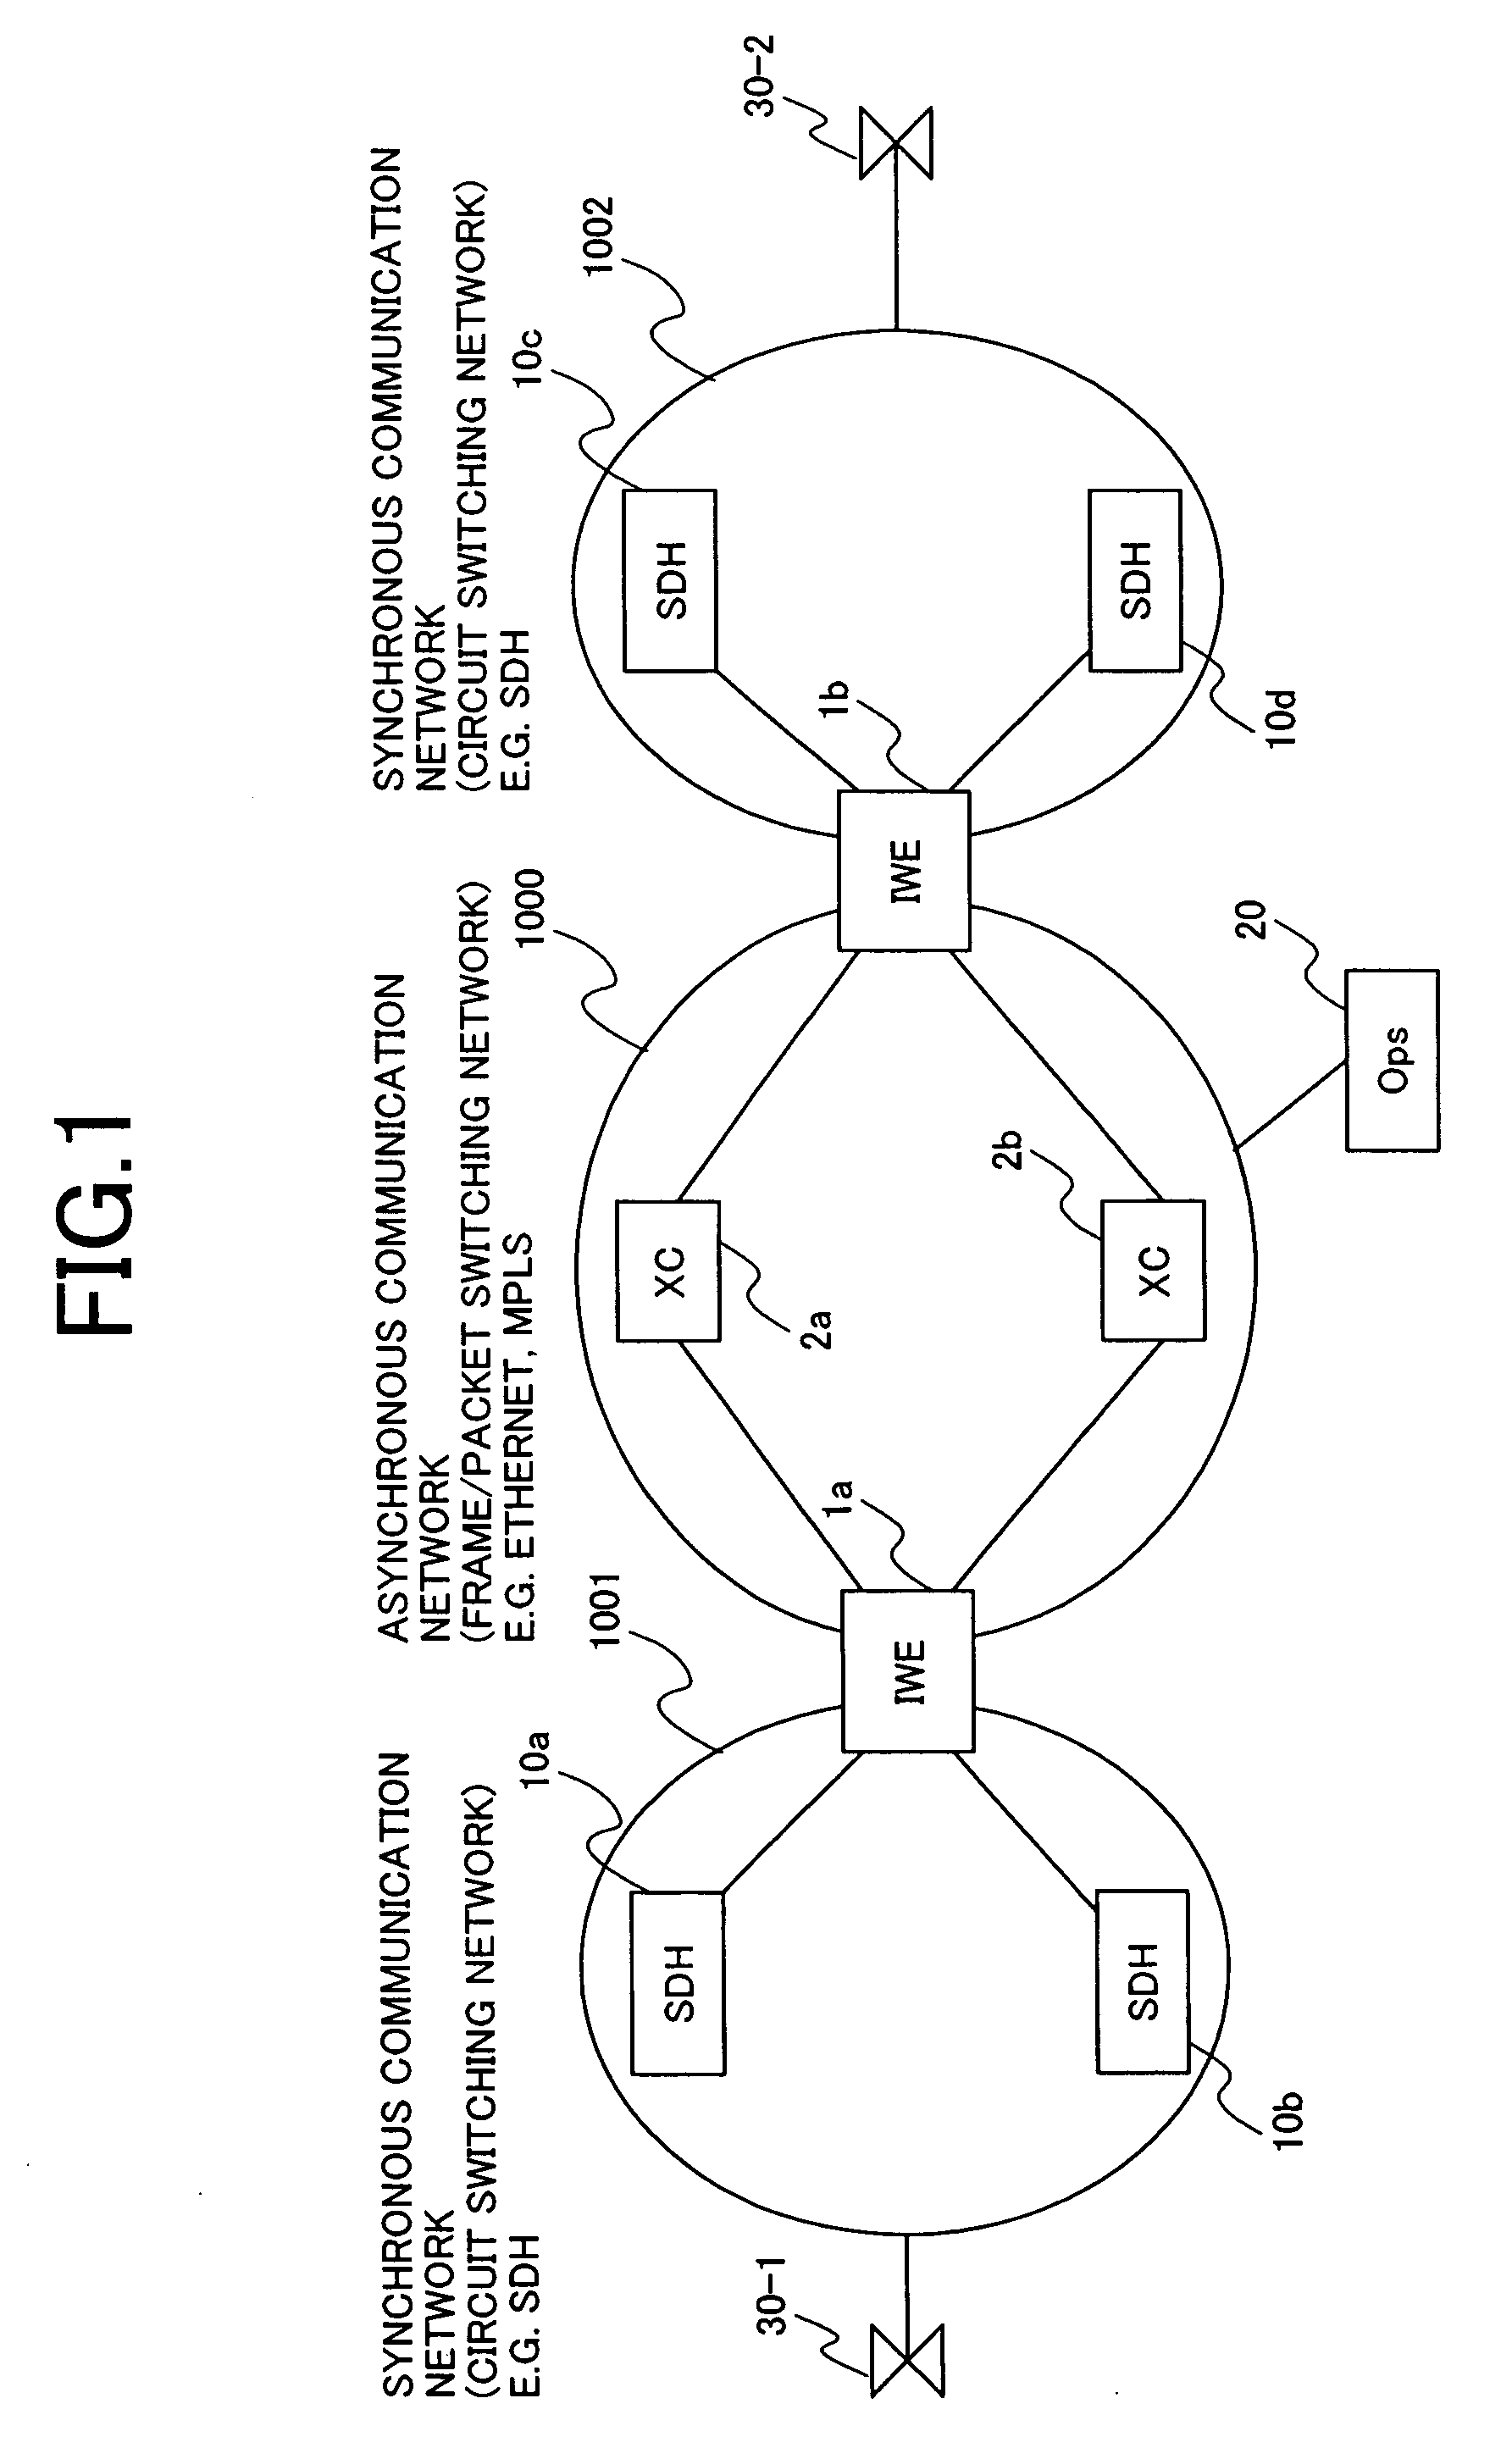 System apparatus and method for interconnecting TDM and frame/packet communication networks